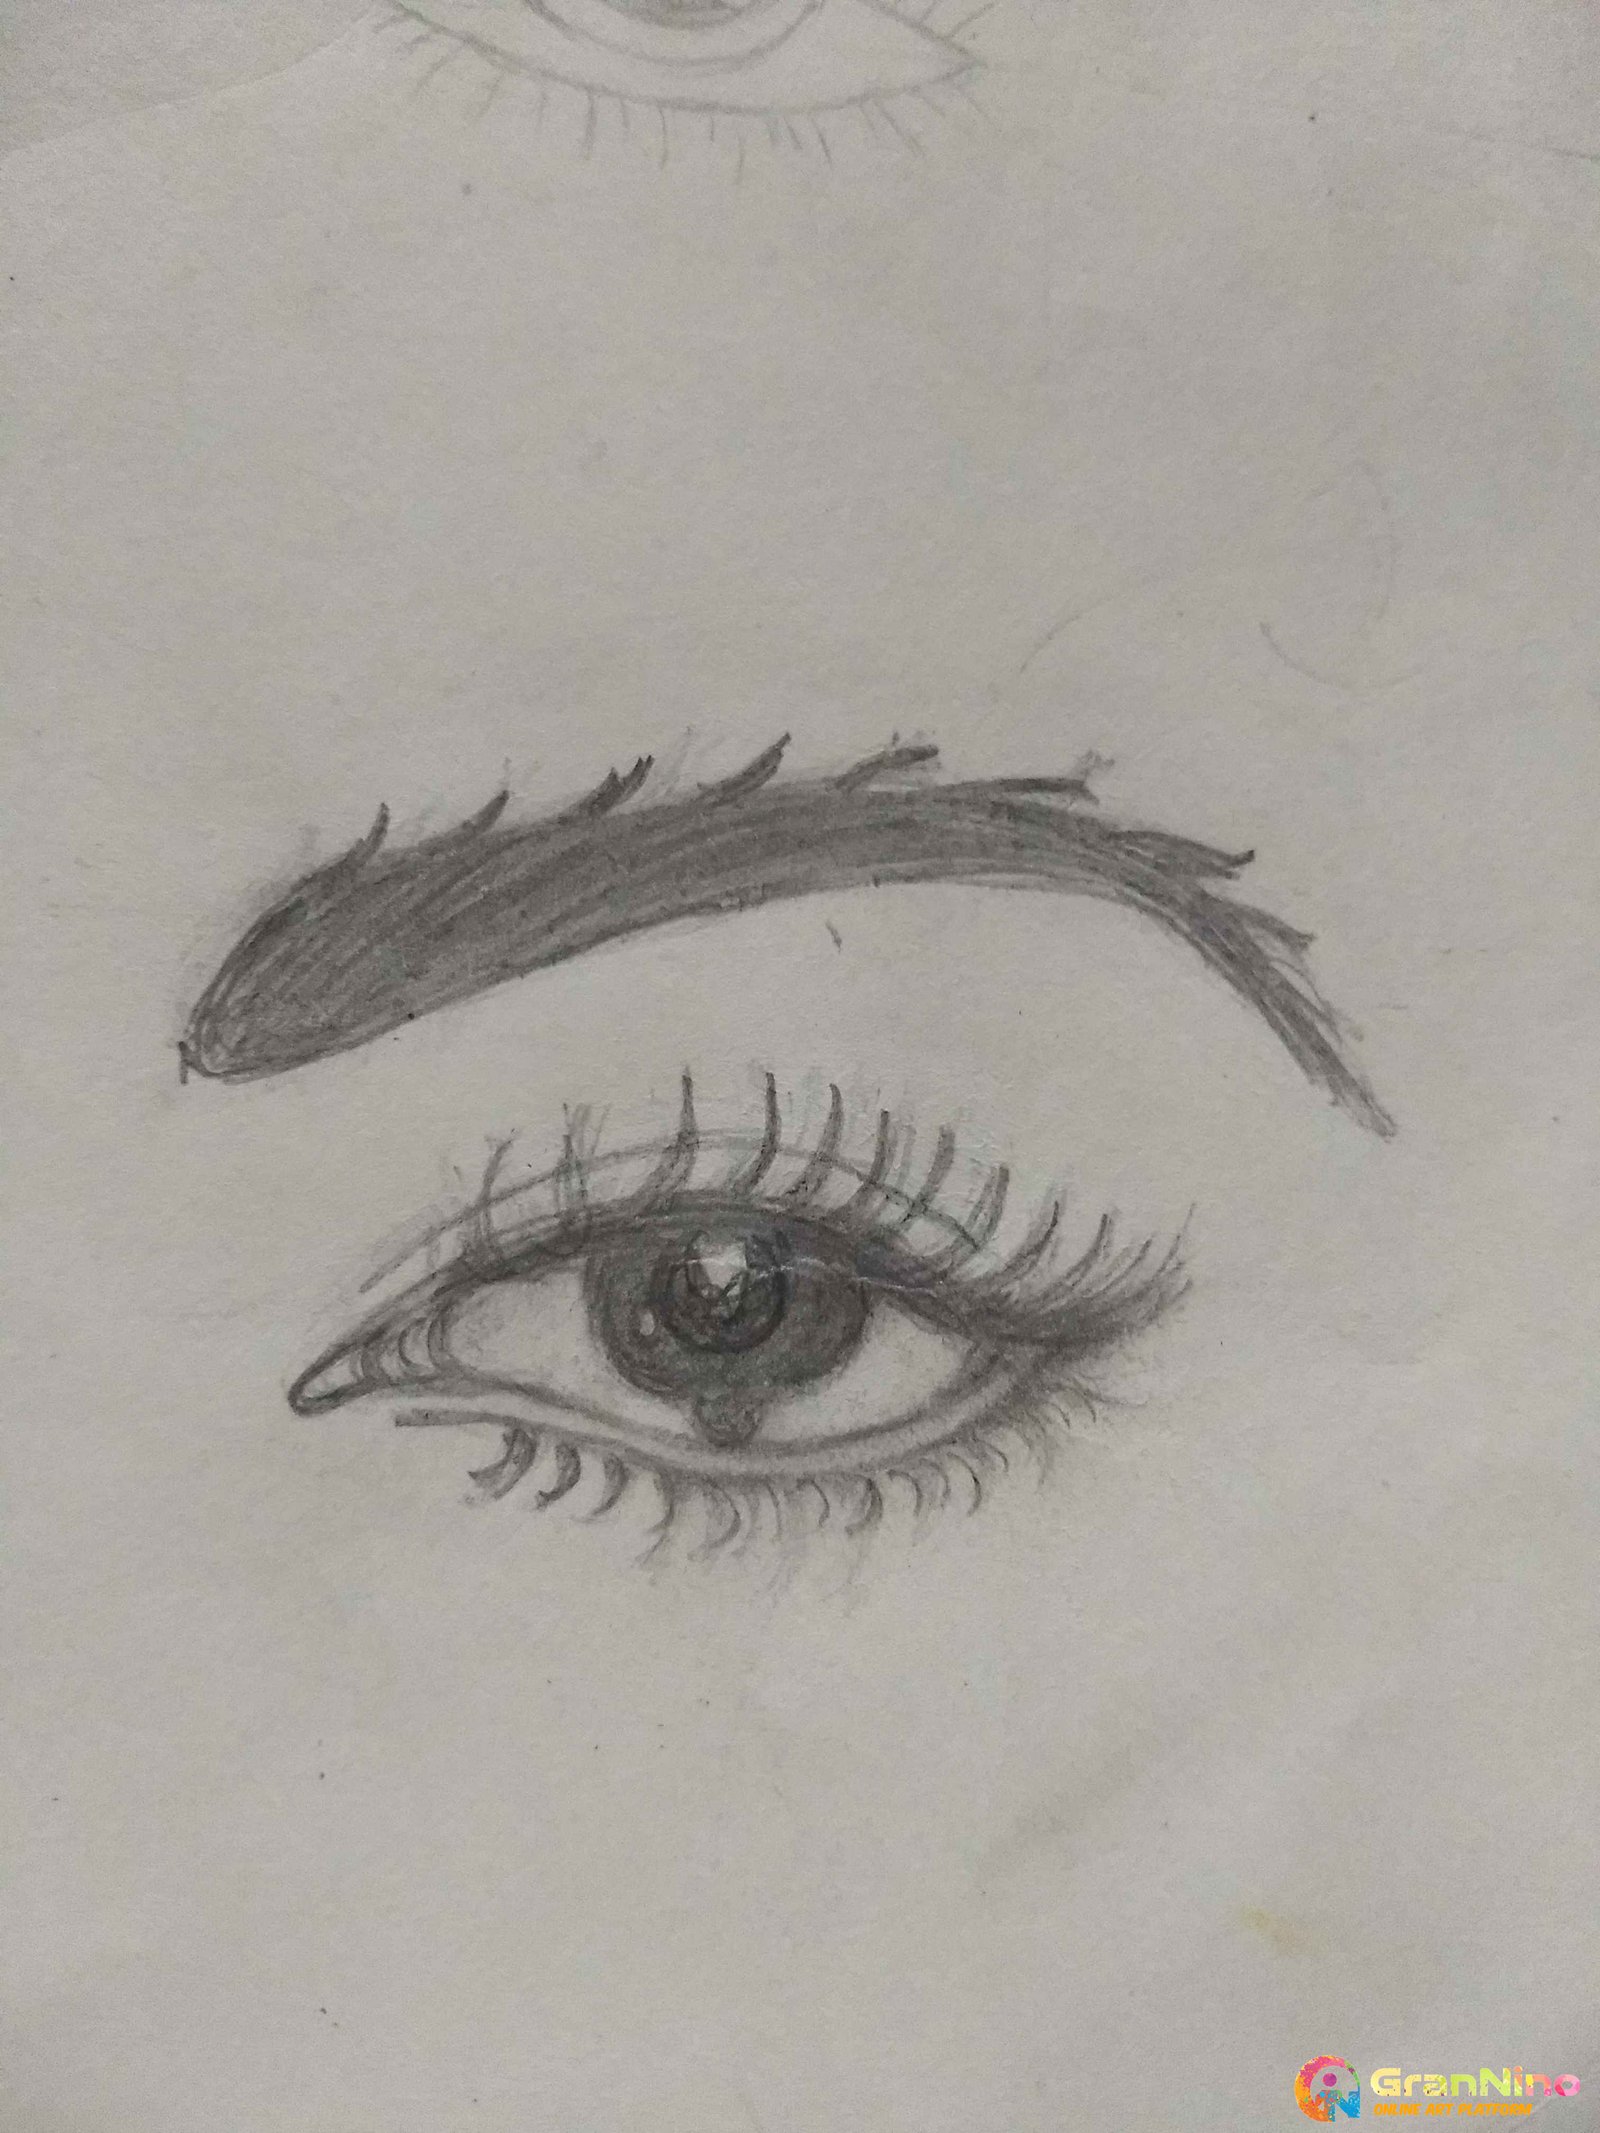 Painting Of An Eye Sketch In Pencil Work Size A3size Sq Cm